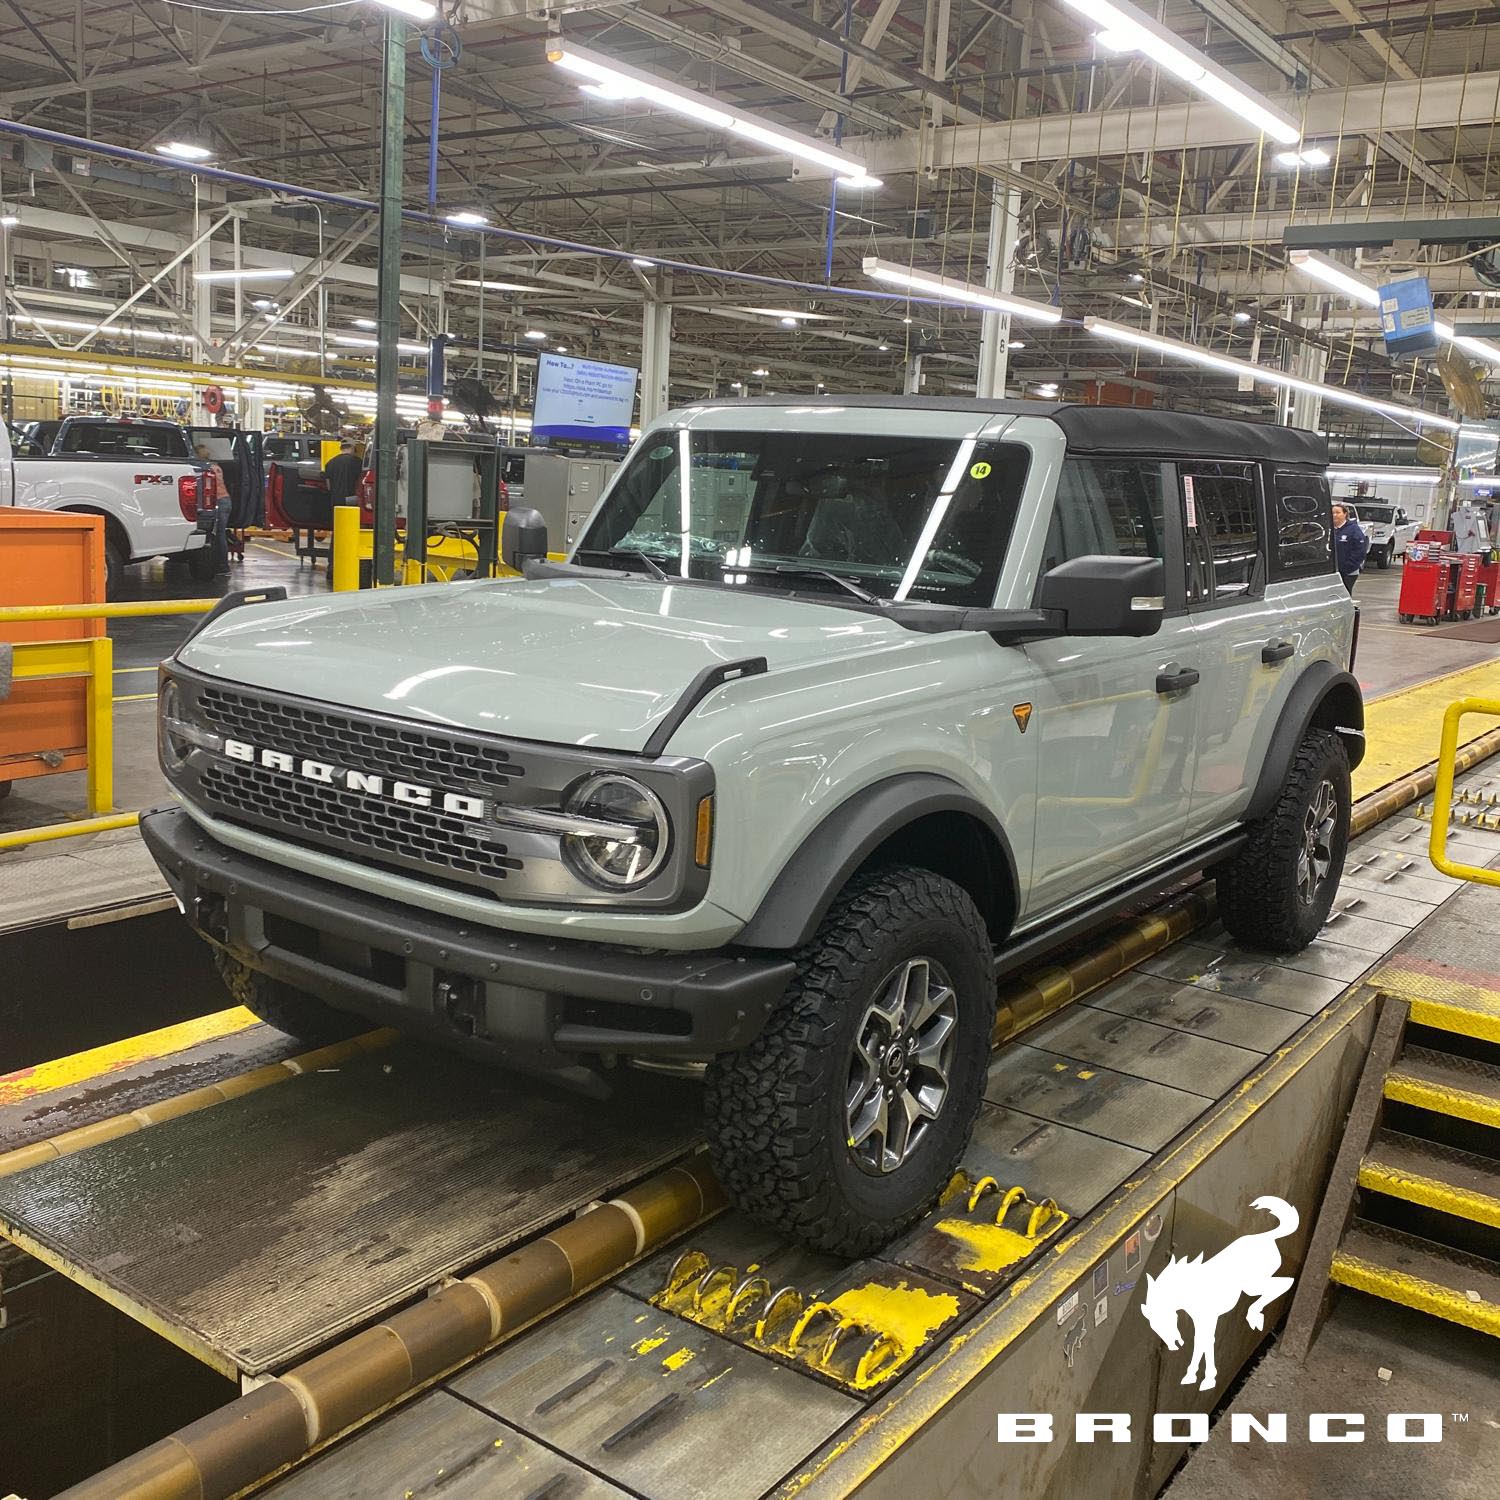 Ford Bronco 03/13/2023 Build Week SPike comng off assembly line